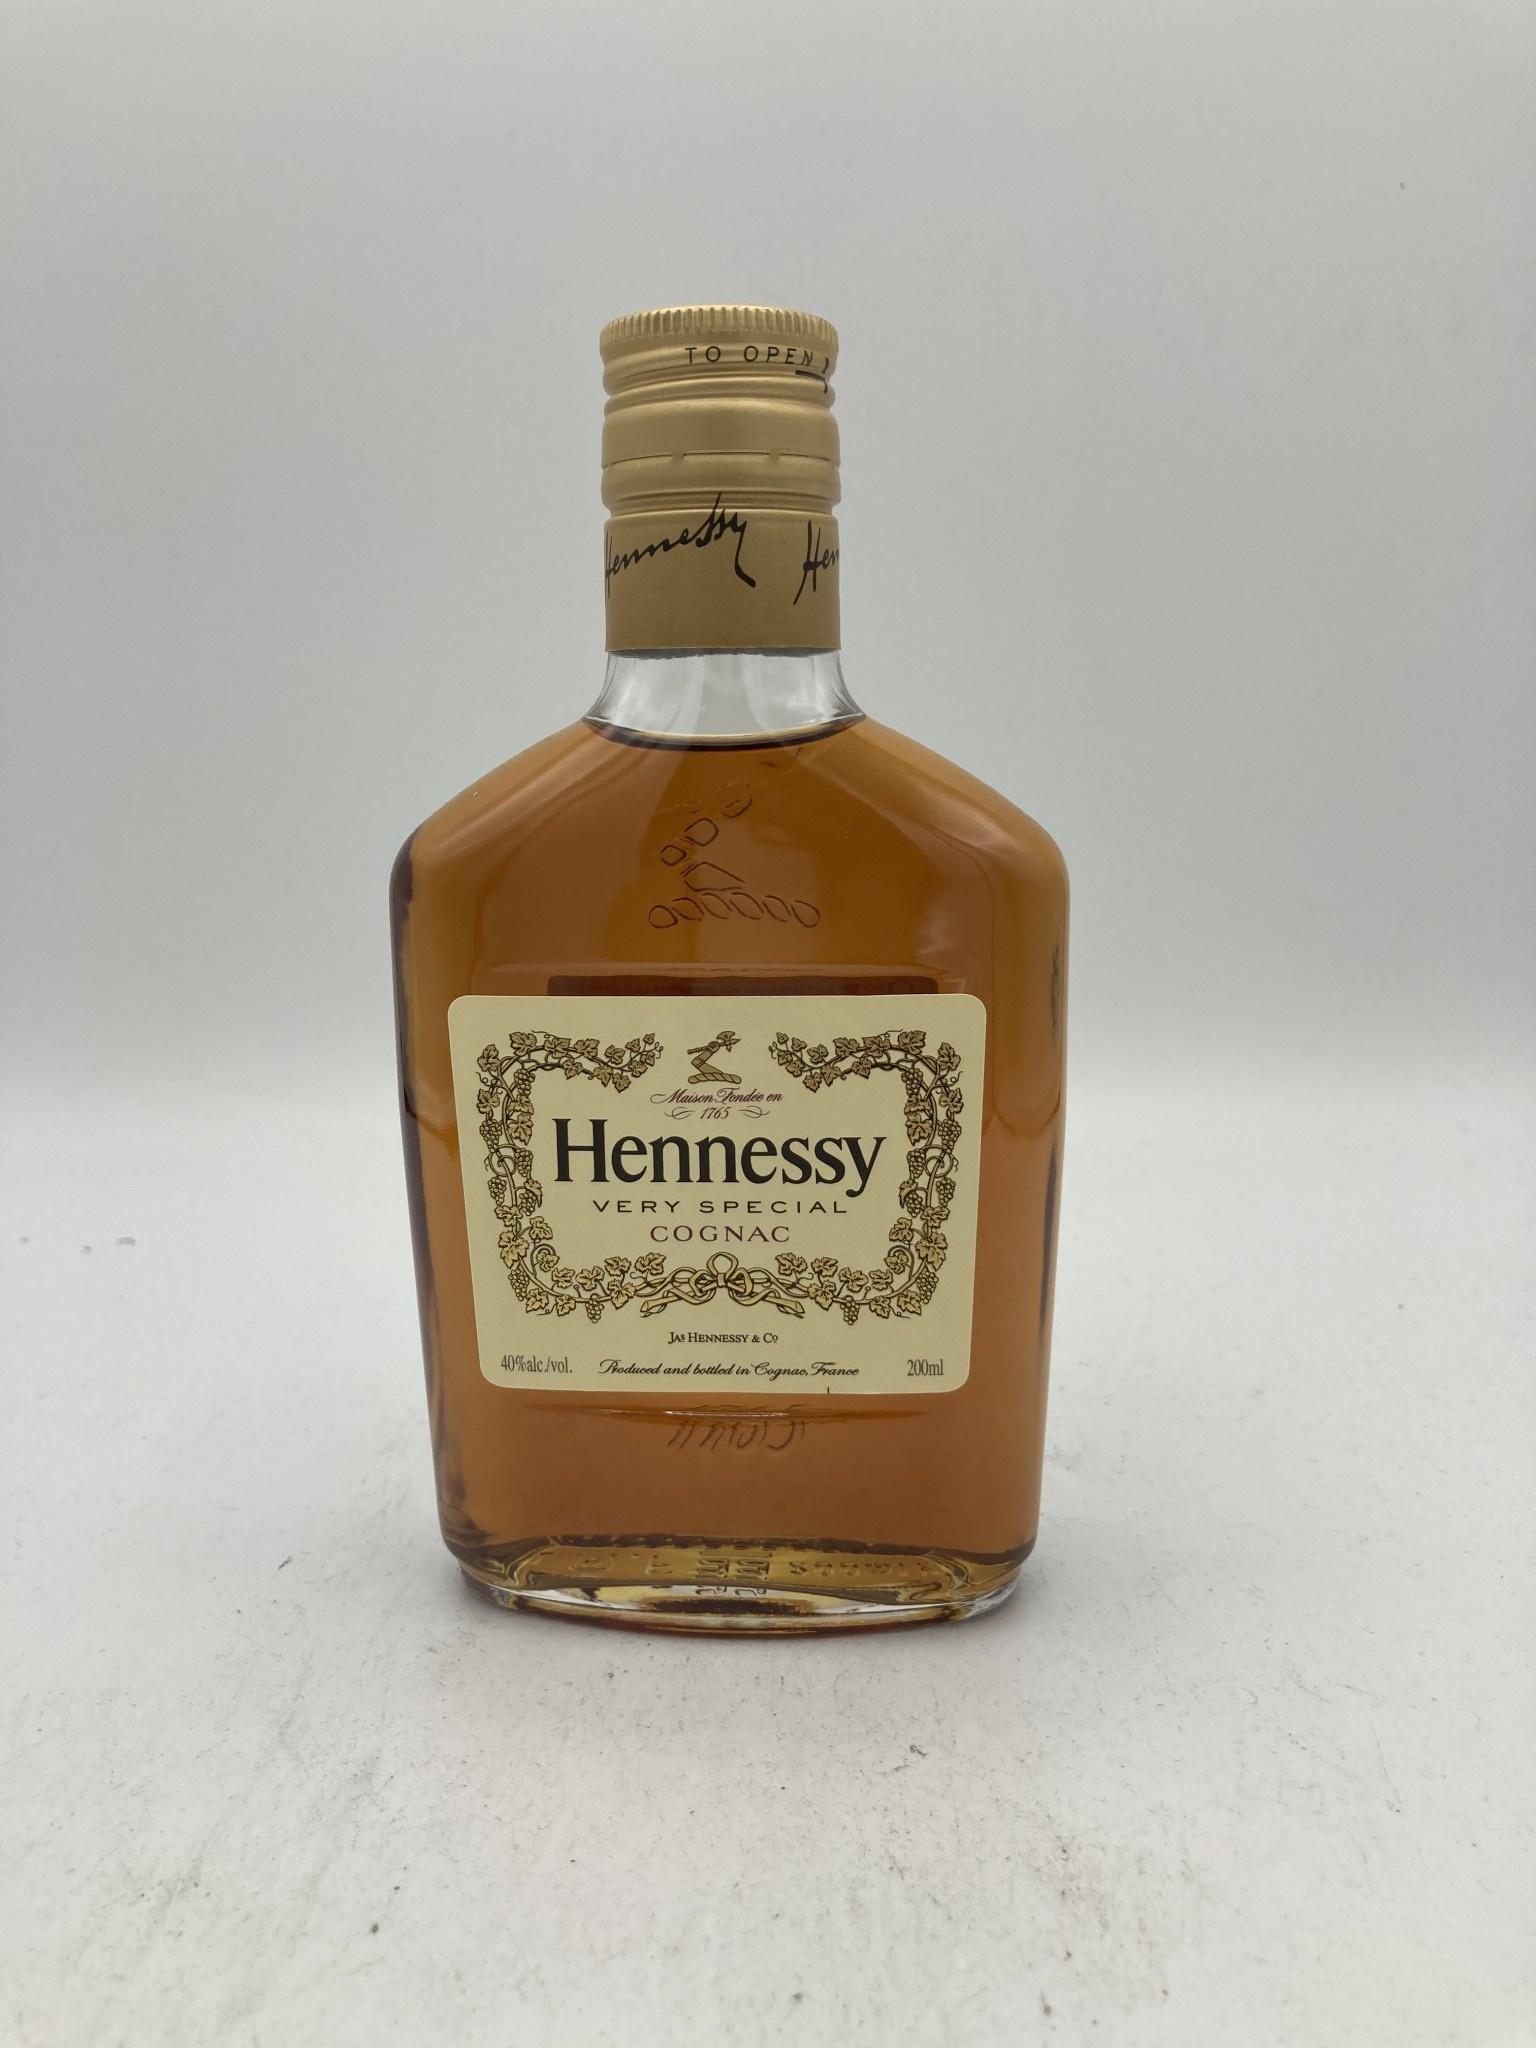 - proof abv 80 Hennessy Main special very cognac liquor Holly 200ml 40%